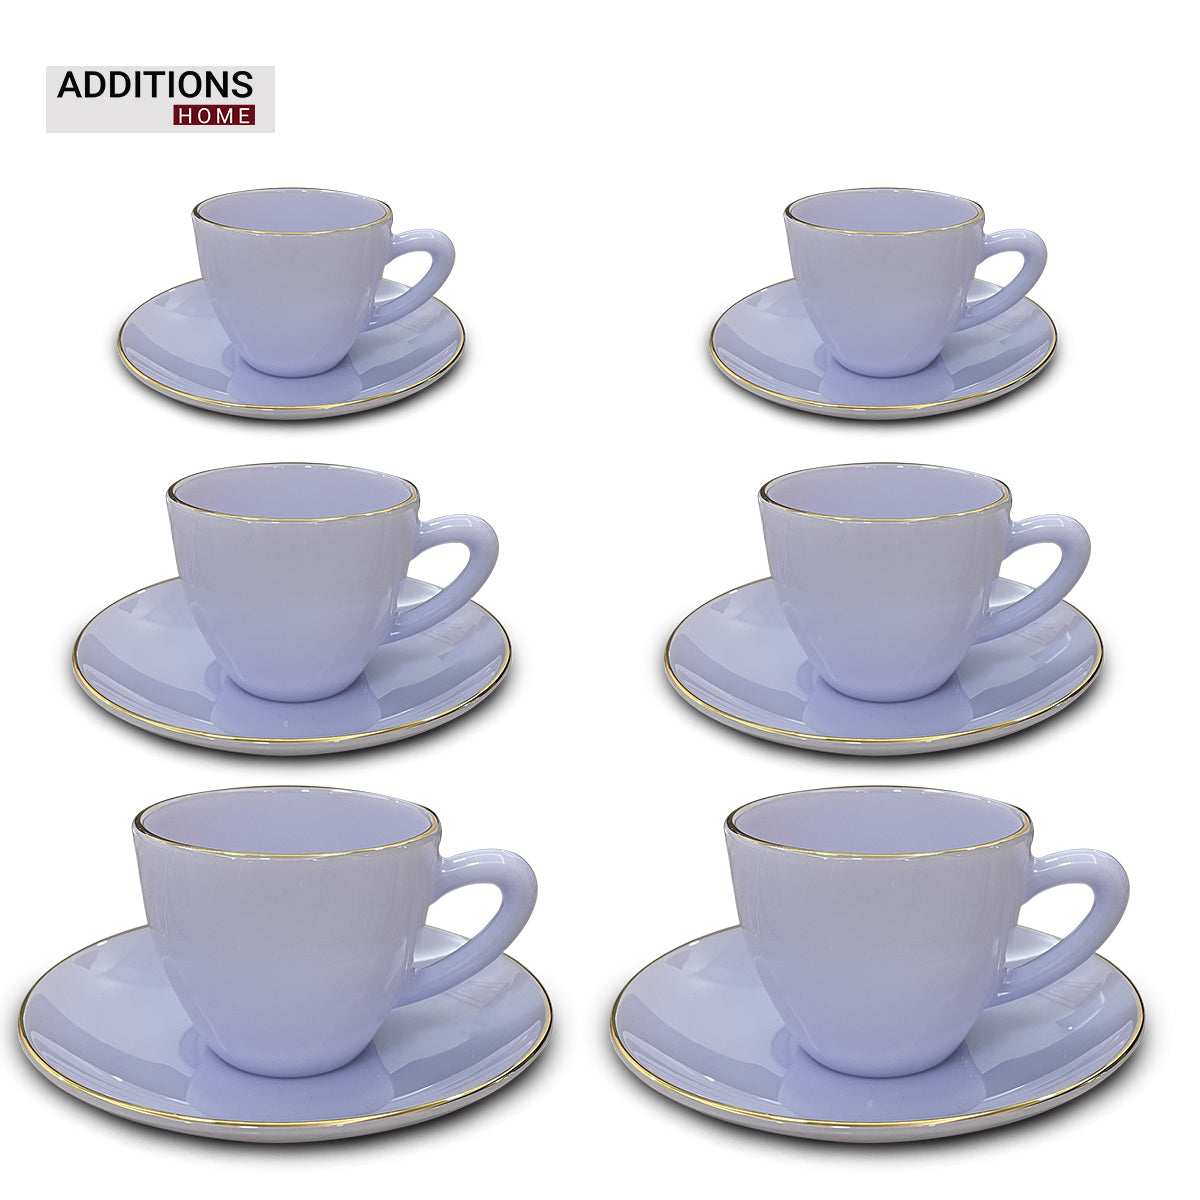 Tea/Coffee Cup & Saucer 12 piece set/ 6 Cups & 6 Saucer. MADE IN THAILAND